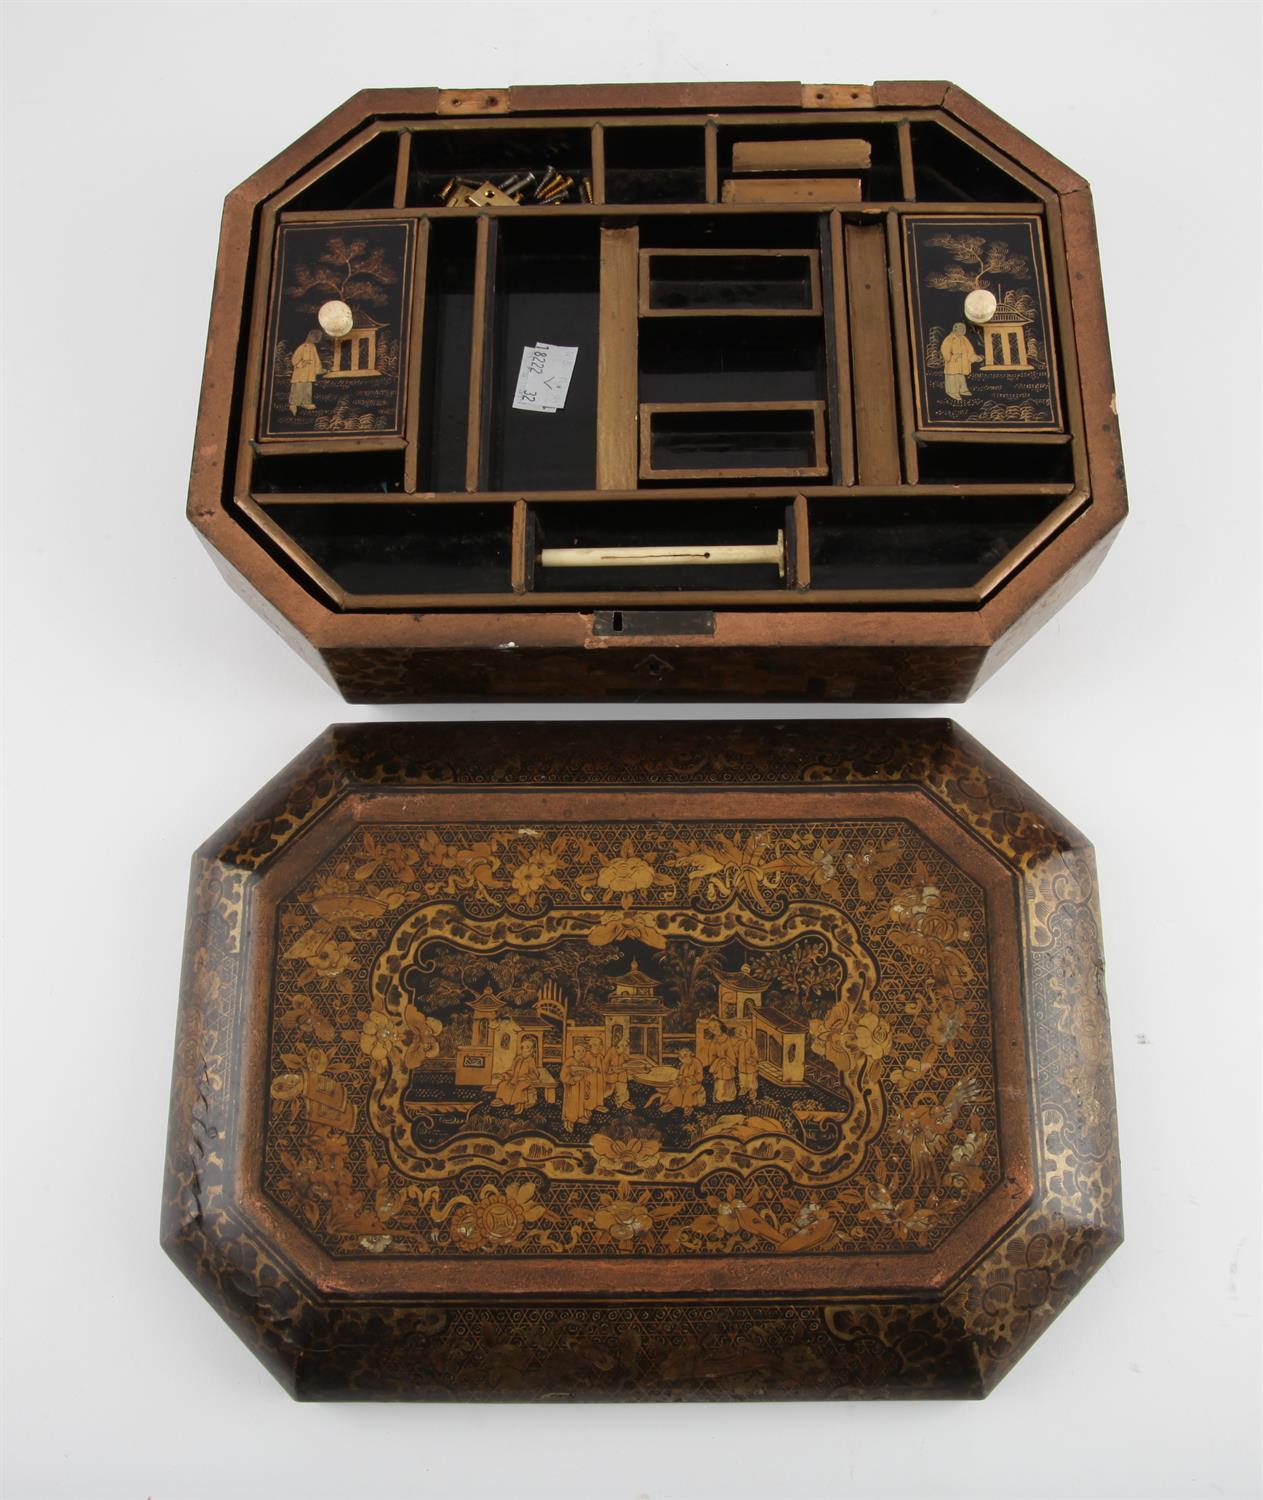 Chinese lacquer sewing box, 19th century. Decorated with intricate designs and images of figures on - Image 2 of 2